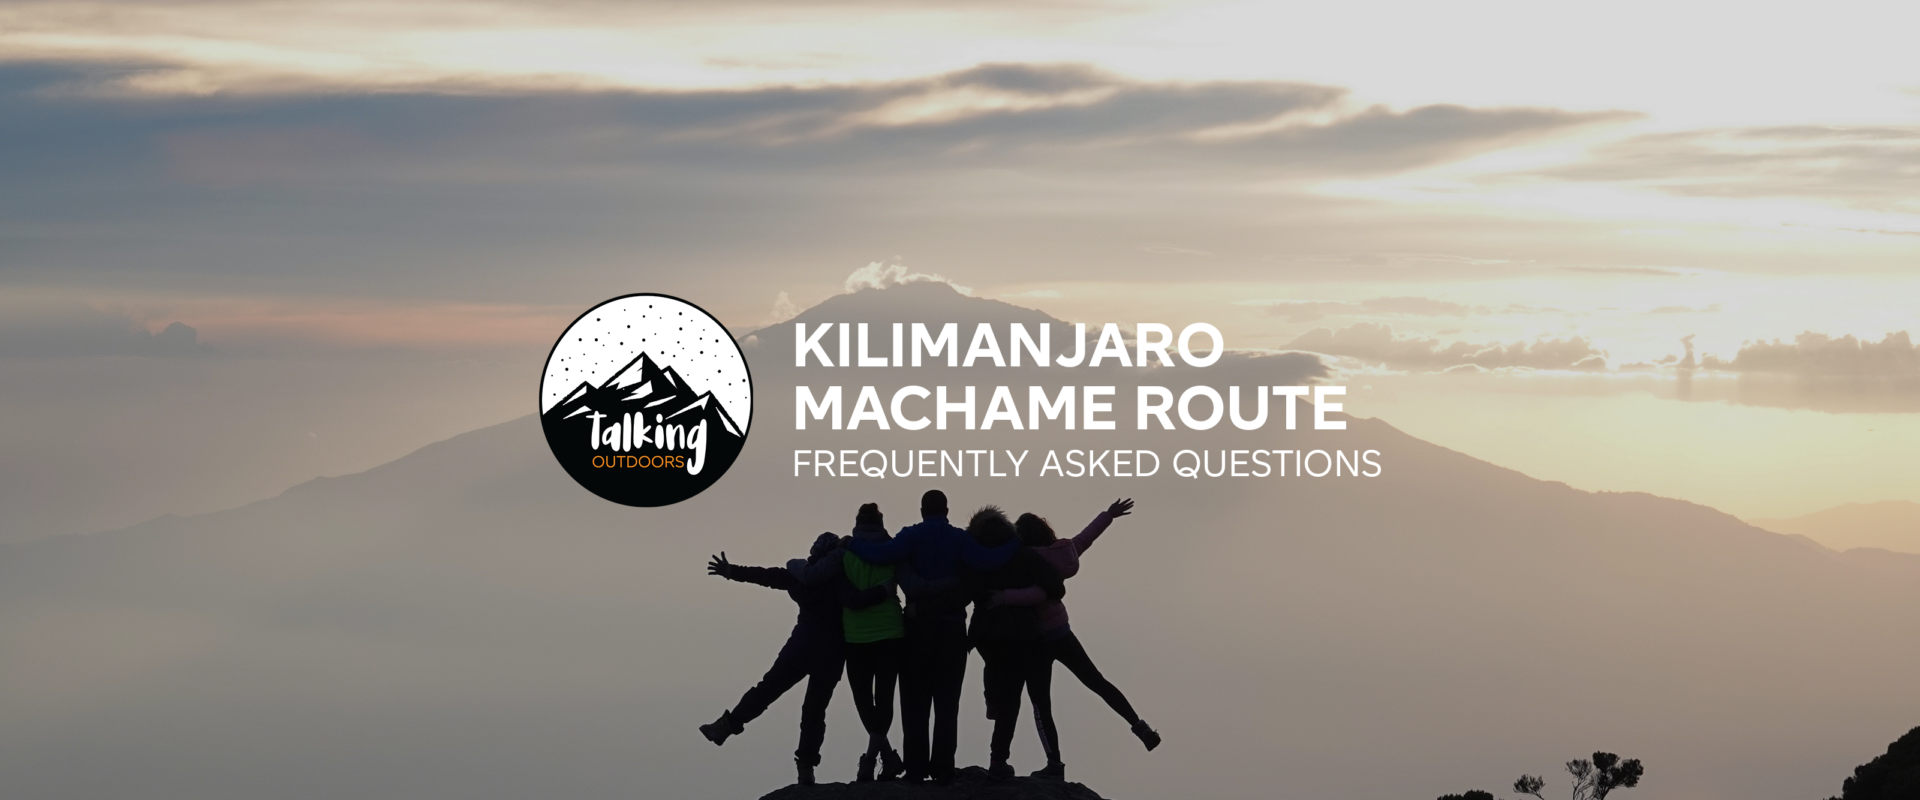 KILIMANJARO MACHAME ROUTE – YOUR QUESTIONS ANSWERED